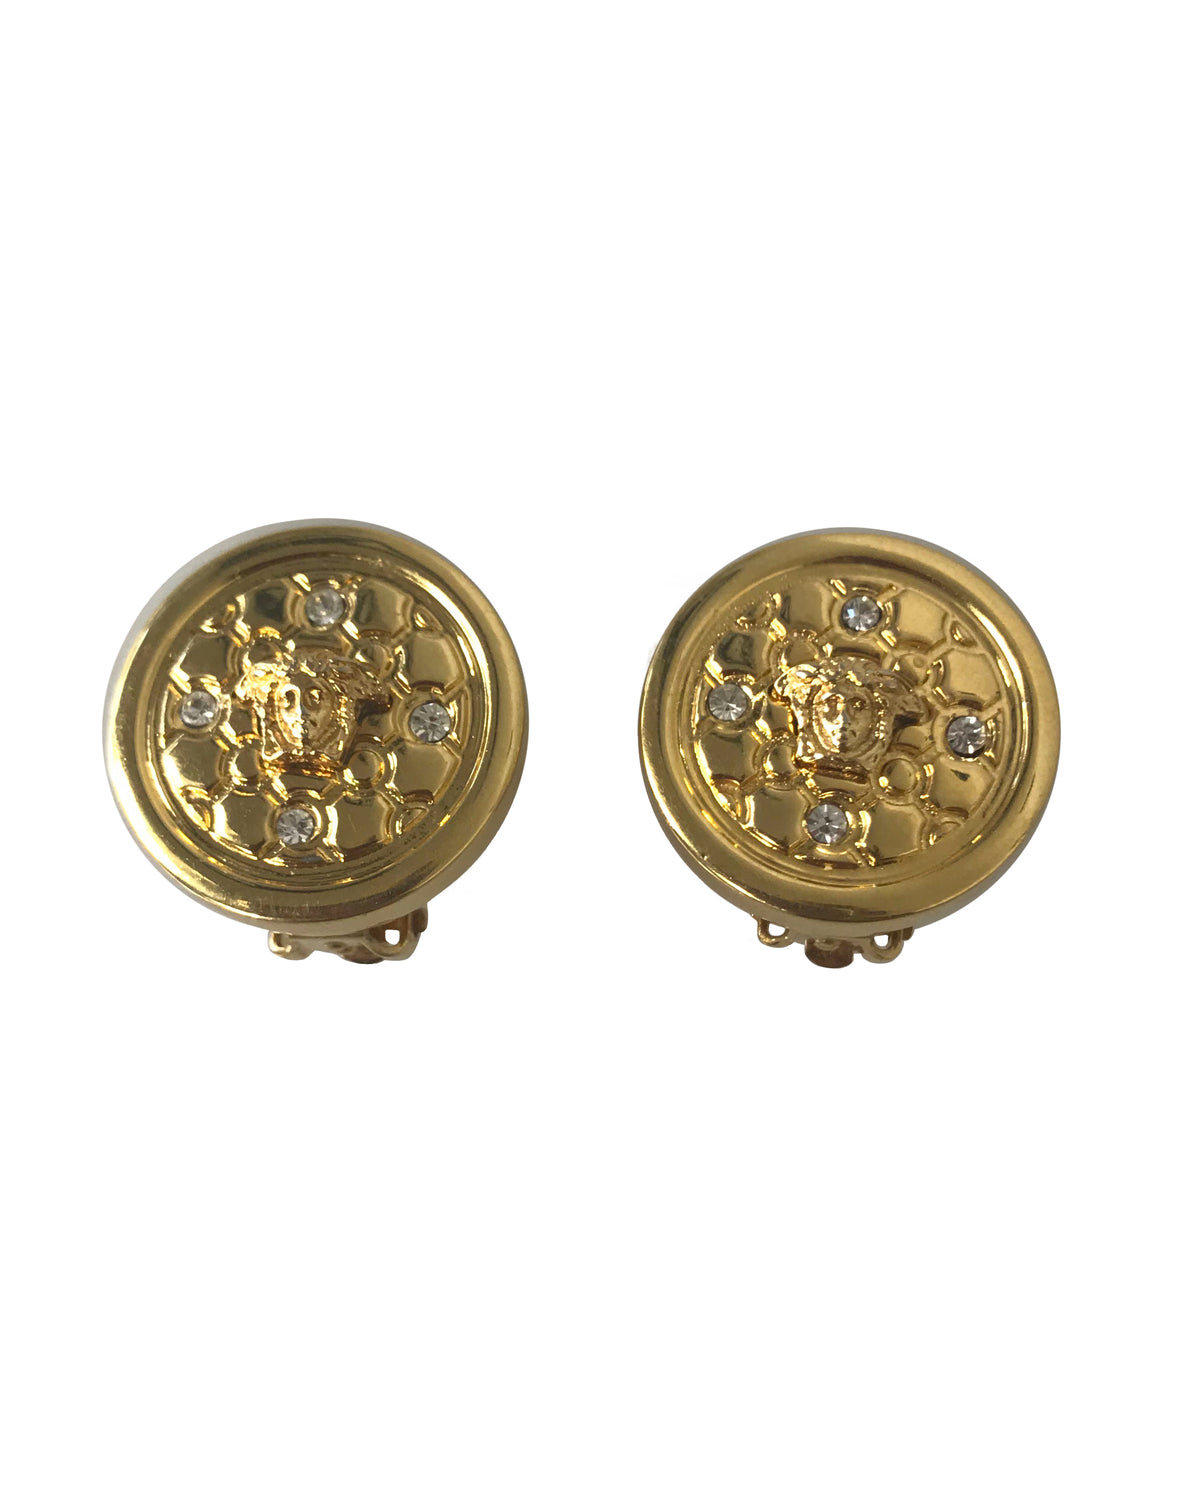 Fruit Vintage Gianni Versace 1980s clip-on coin shaped earrings with small Medusa heads, surrounded by rhinestones.